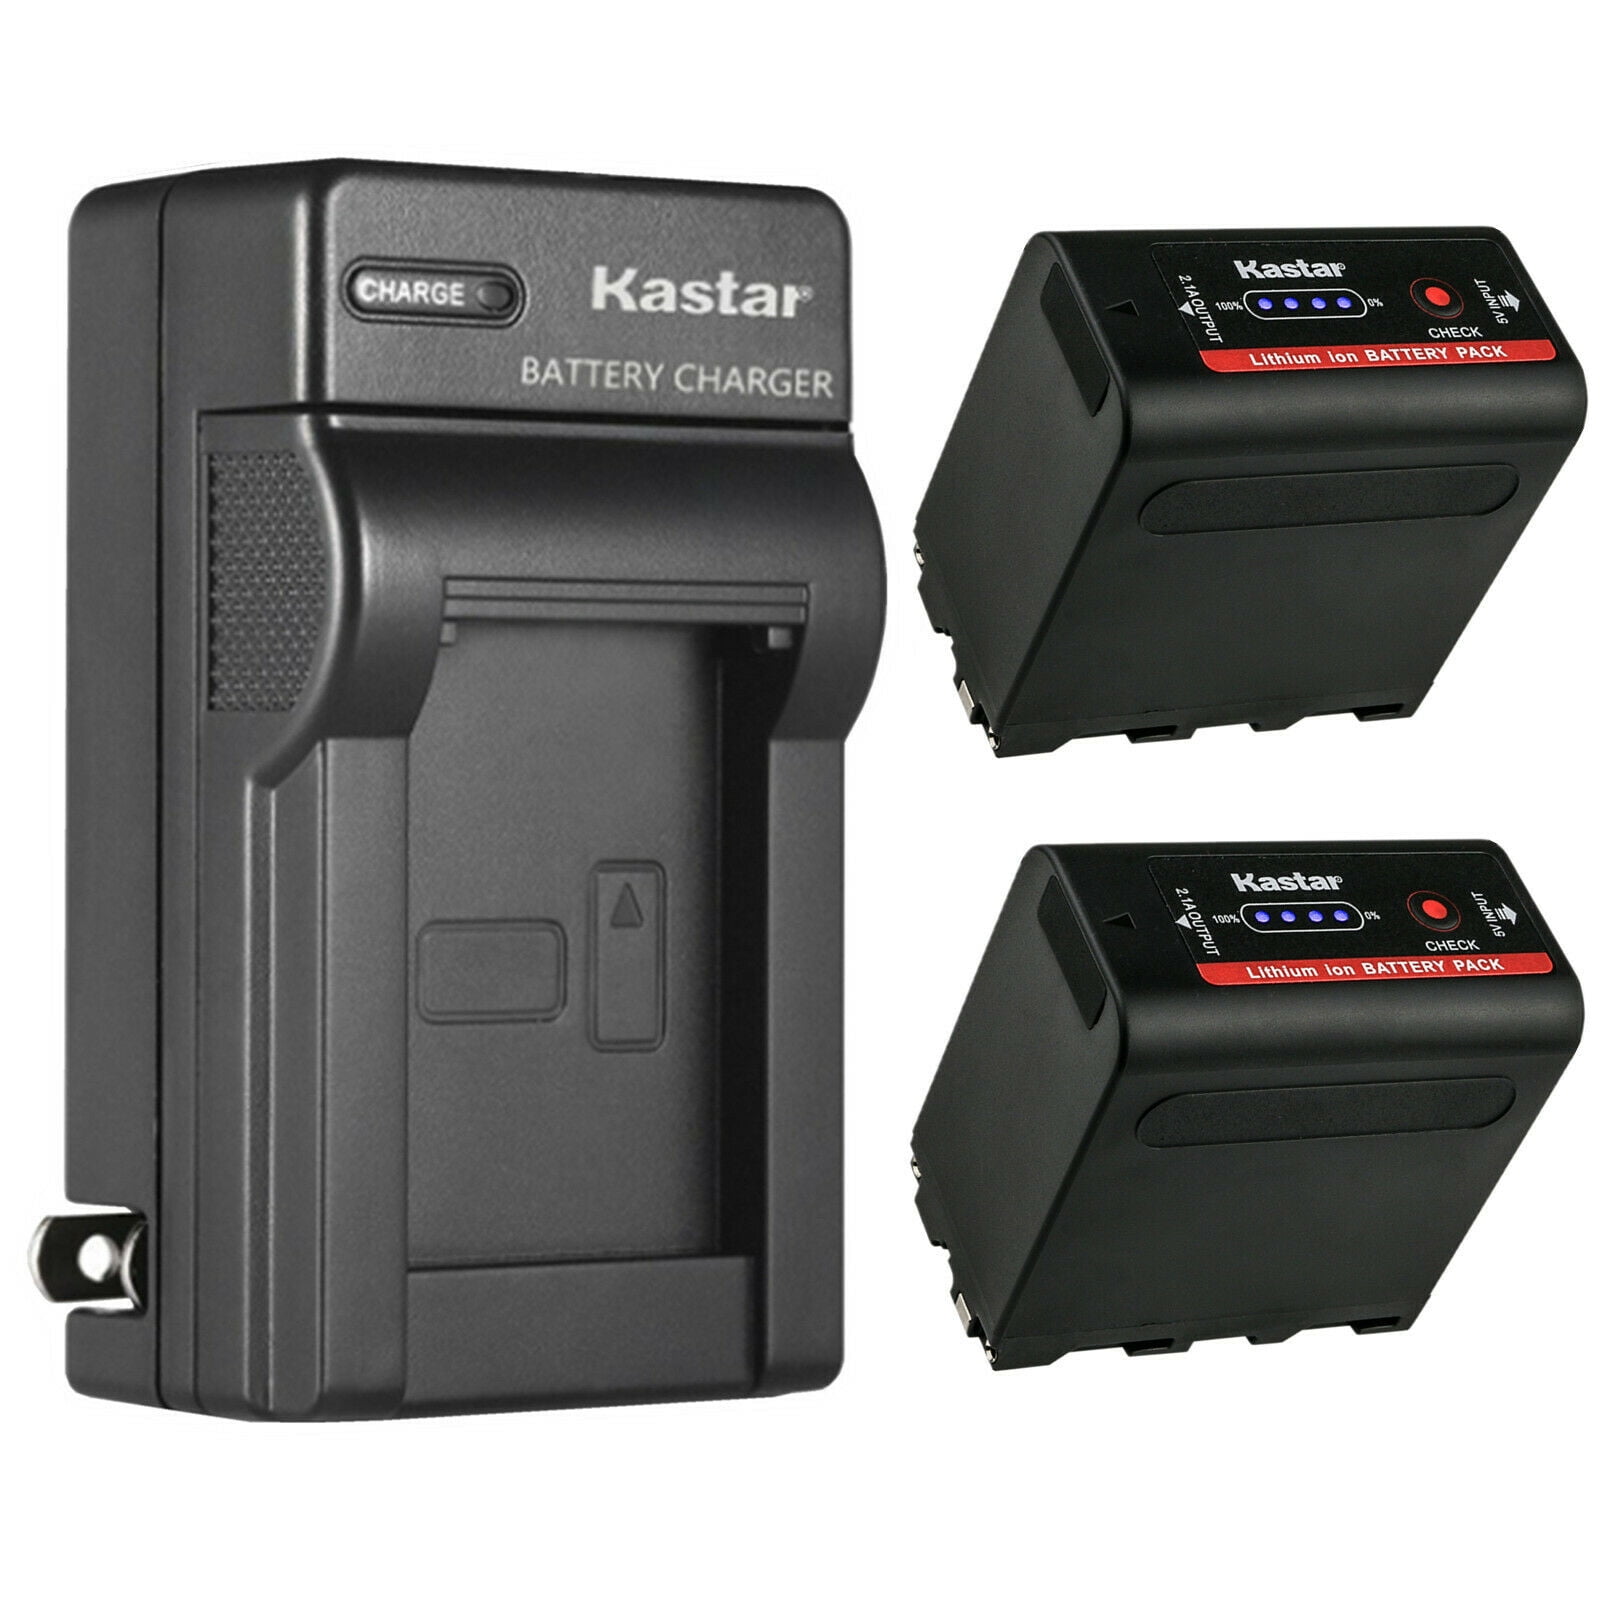 Kastar 4 Pack Battery and Dual Rapid Charger for Sony NP-F980 Pro NP-F960 Sony NP-F330 NP-F550 NP-F570 NP-F730 NP-F750 NP-F770 NP-F930 NP-F950 NP-F970 NP-F970PRO NP-F980 NP-F980PRO